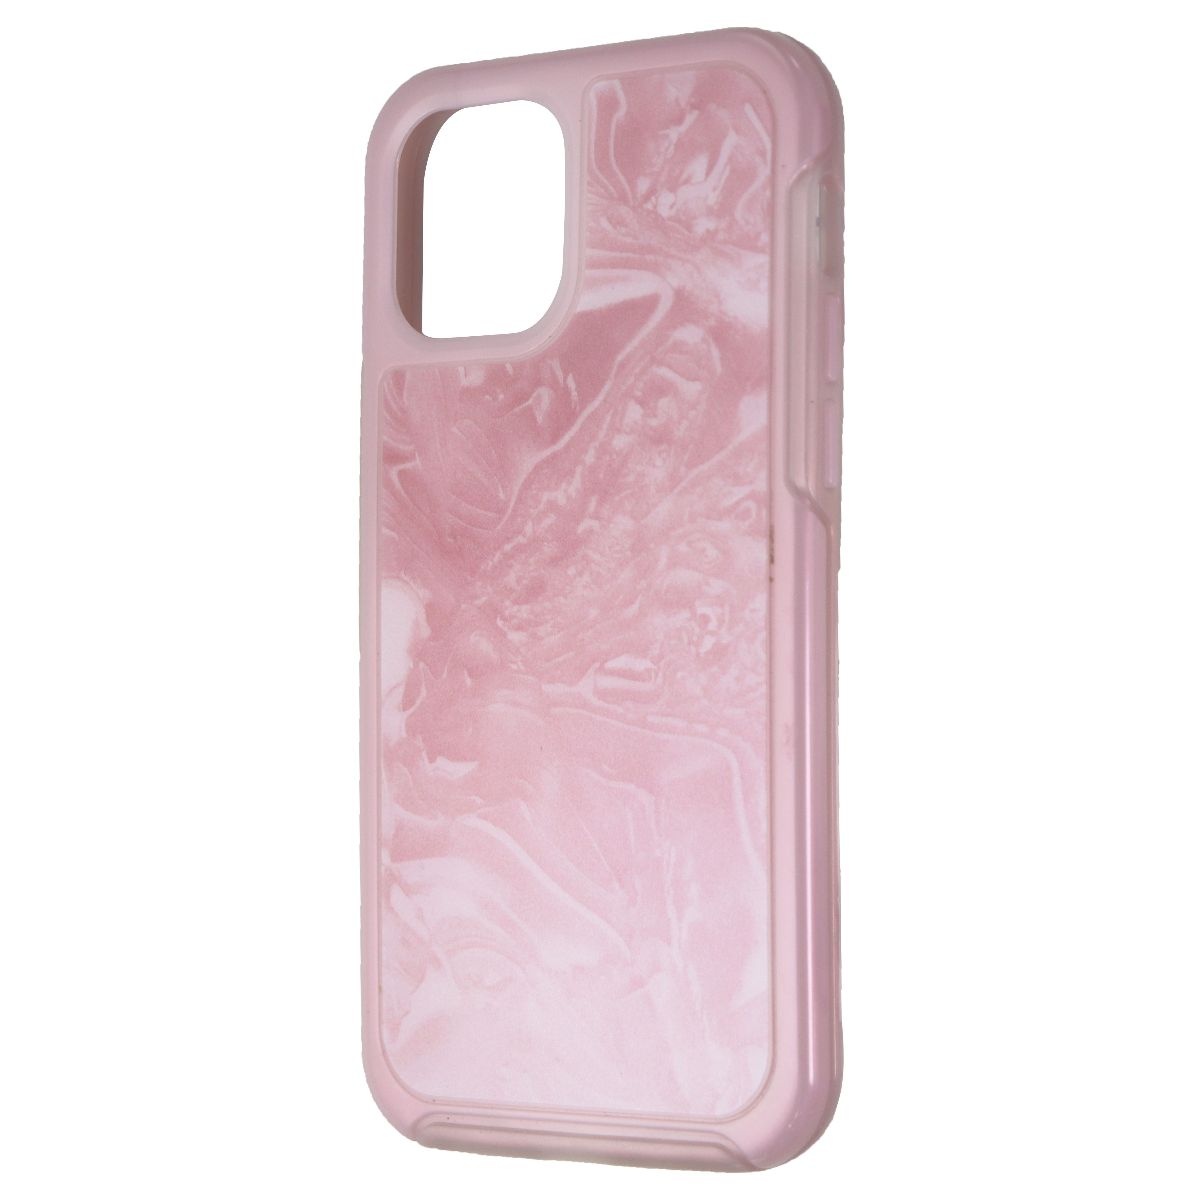 OtterBox Symmetry Case for Apple iPhone 12 & iPhone 12 Pro - Shell-Shocked/Pink (Used) - image 1 of 1